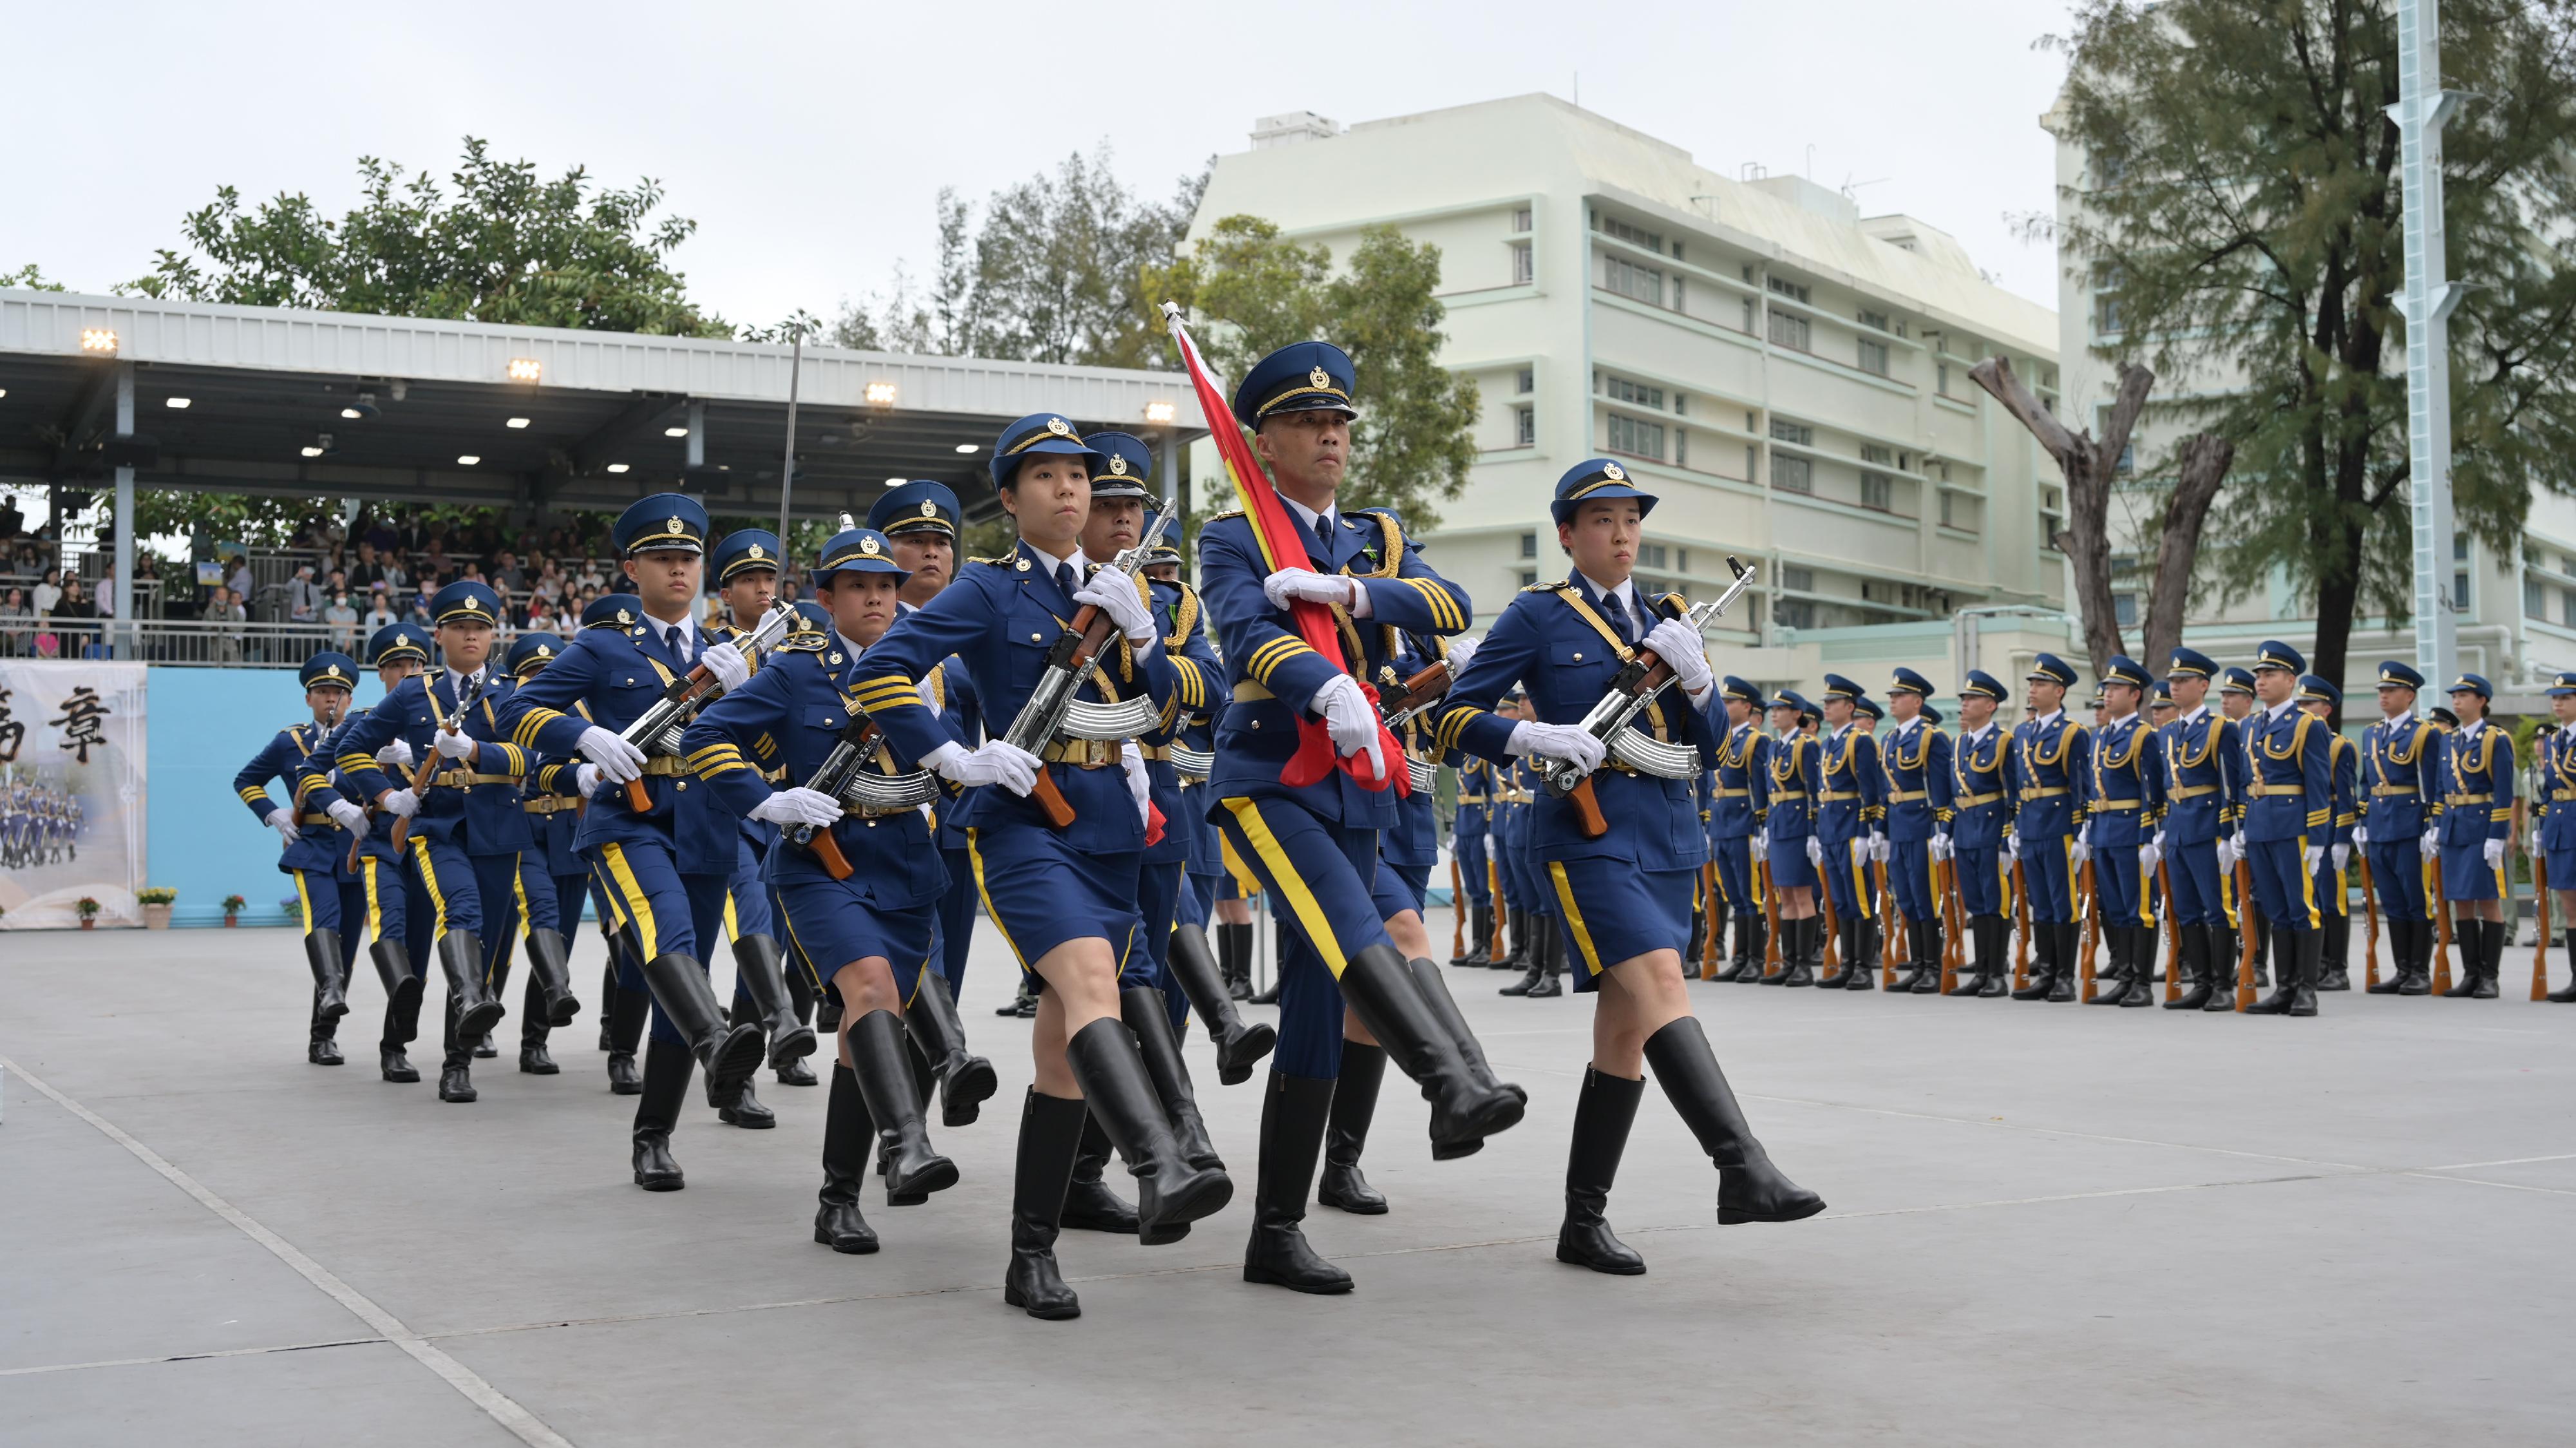 The Correctional Services Department held a passing-out parade at the Hong Kong Correctional Services Academy today (April 21). Photo shows a Chinese-style foot drill demonstration by the Guard of Honour.